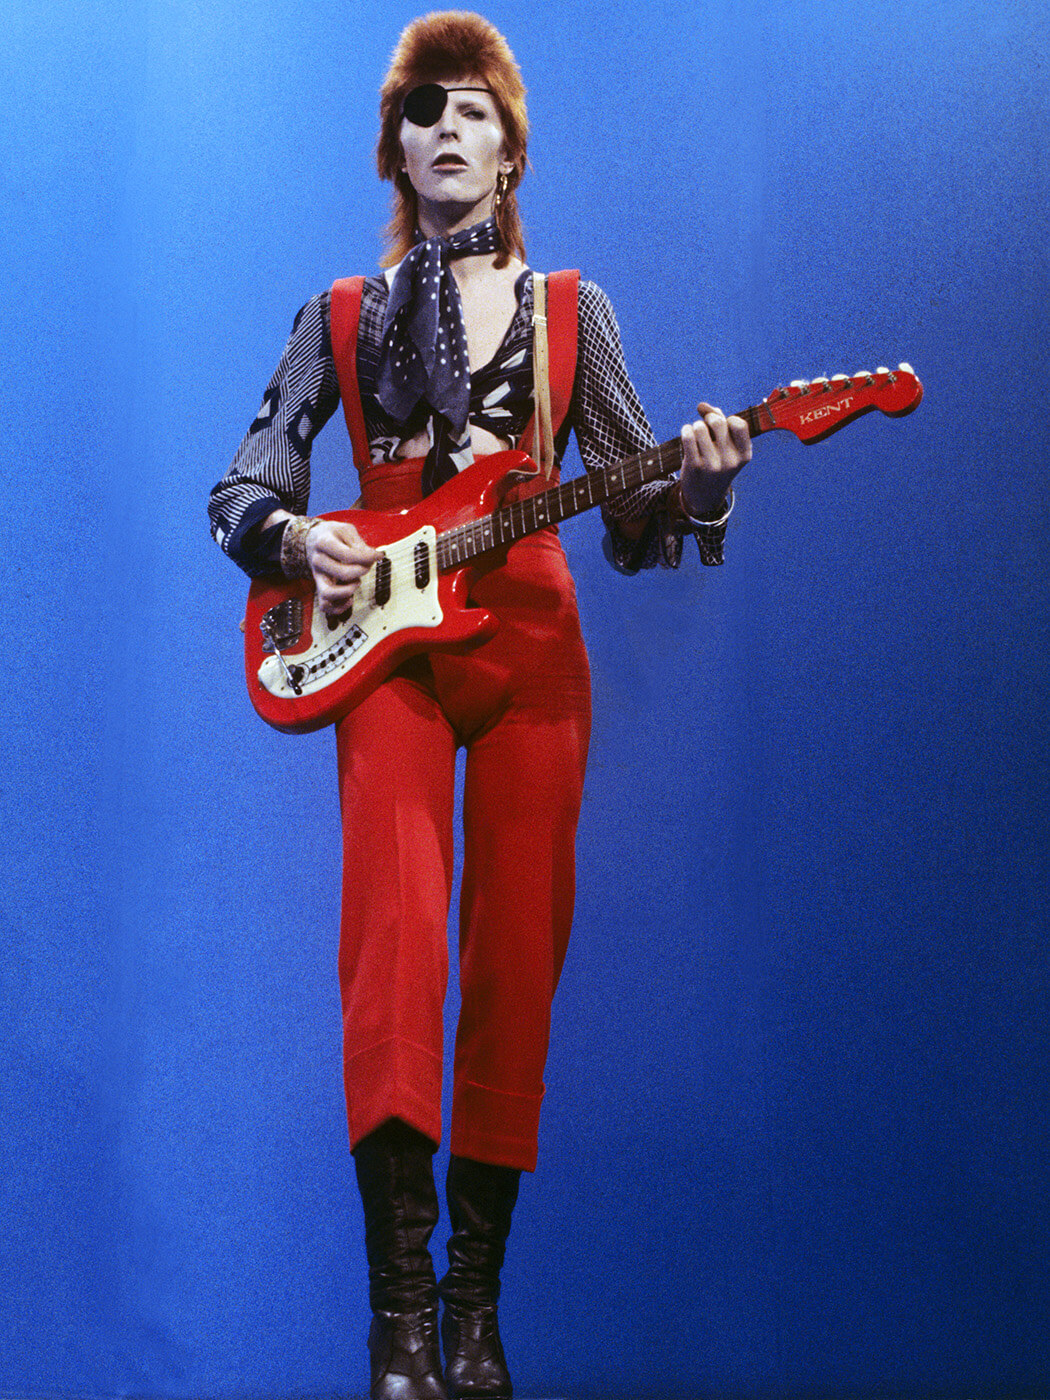 David Bowie performing with a Hagstrom Kent guitar in 1974, photo by Gijsbert Hanekroot/Redferns via Getty Images